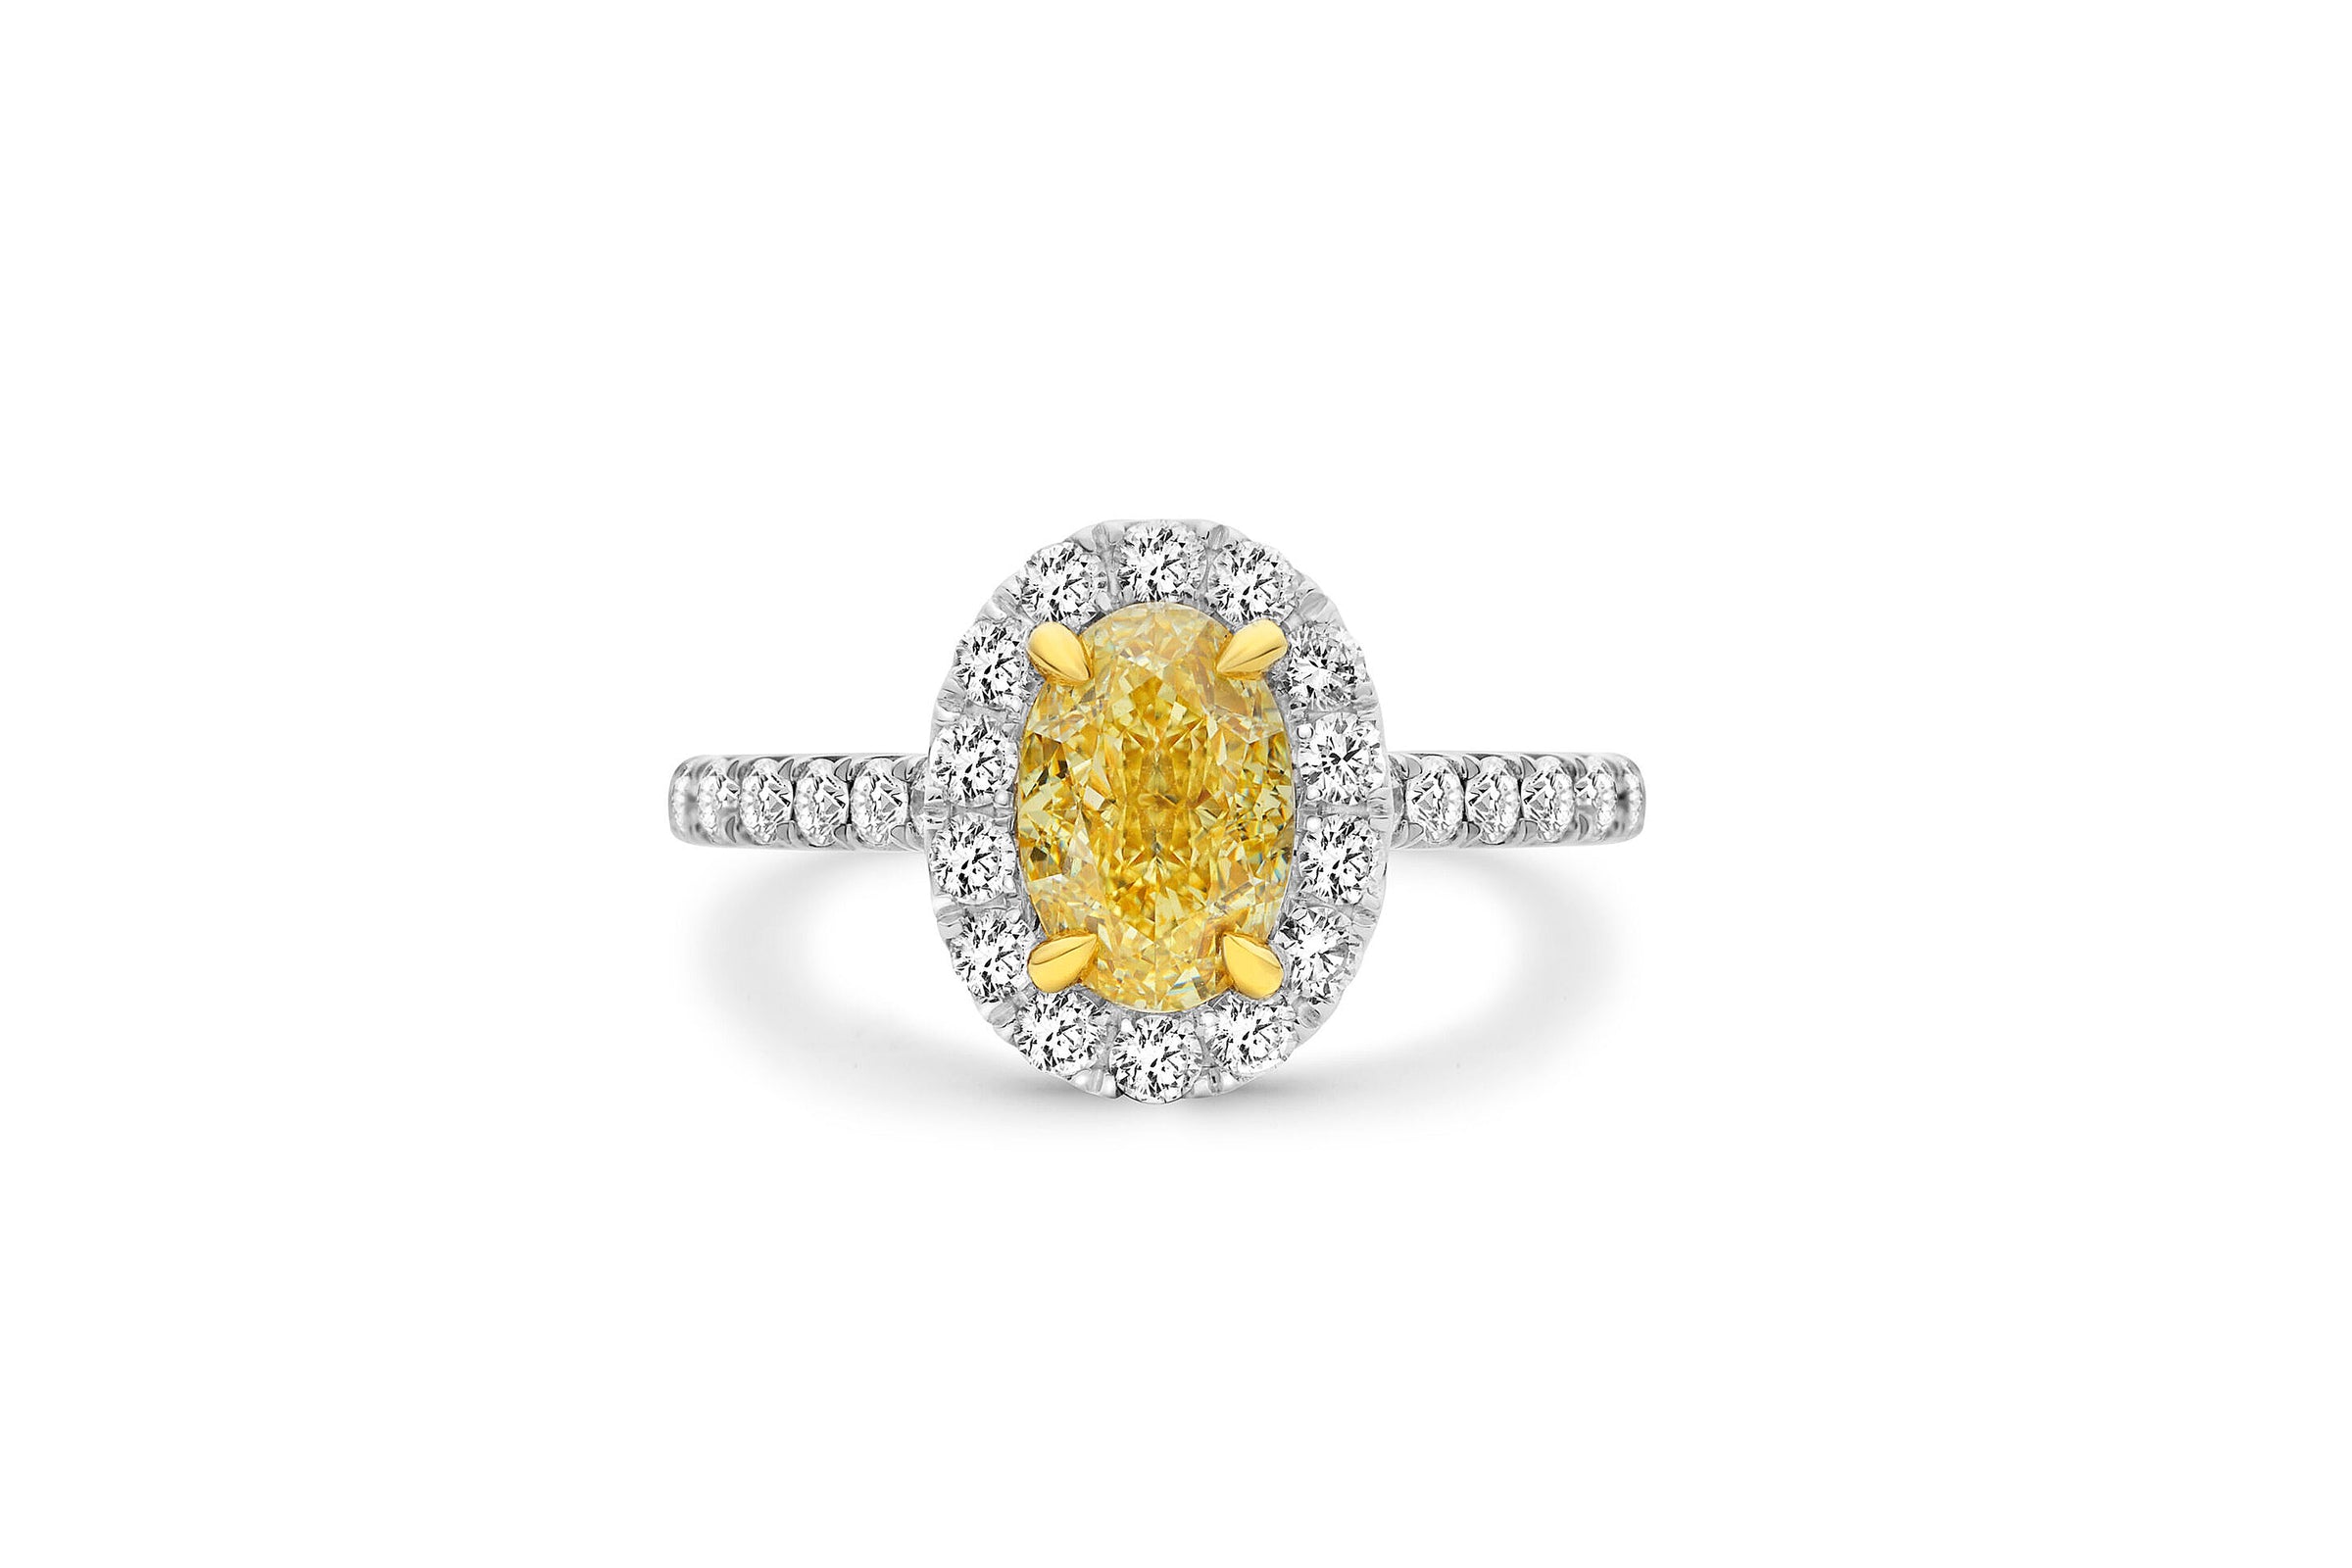 Fancy Yellow diamond engagement rings in Perth